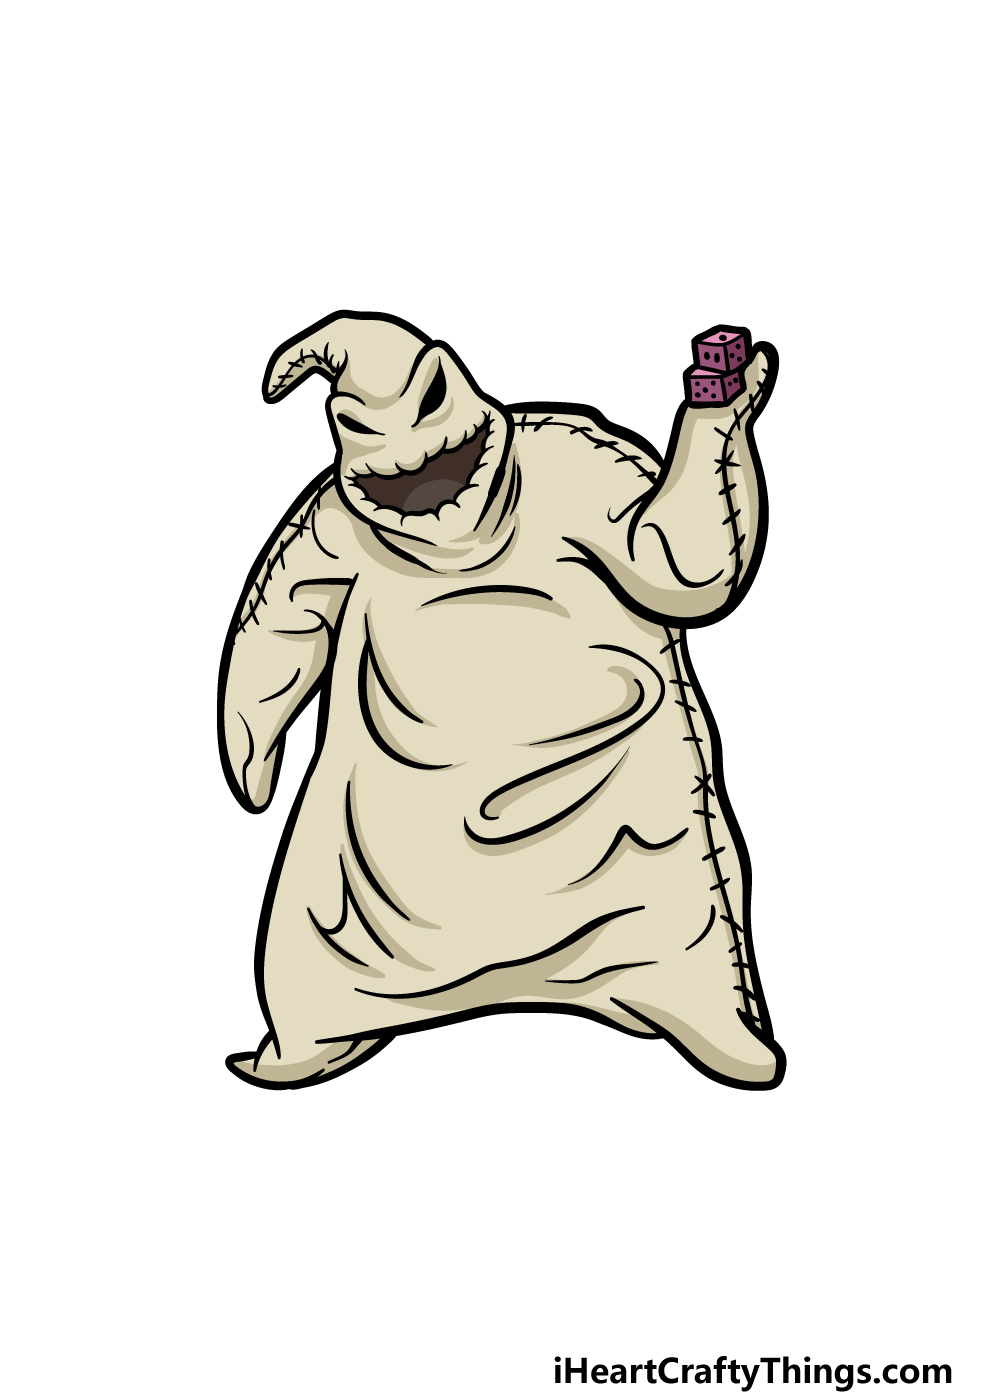 Oogie Boogie Drawing - How To Draw Oogie Boogie Step By Step. 